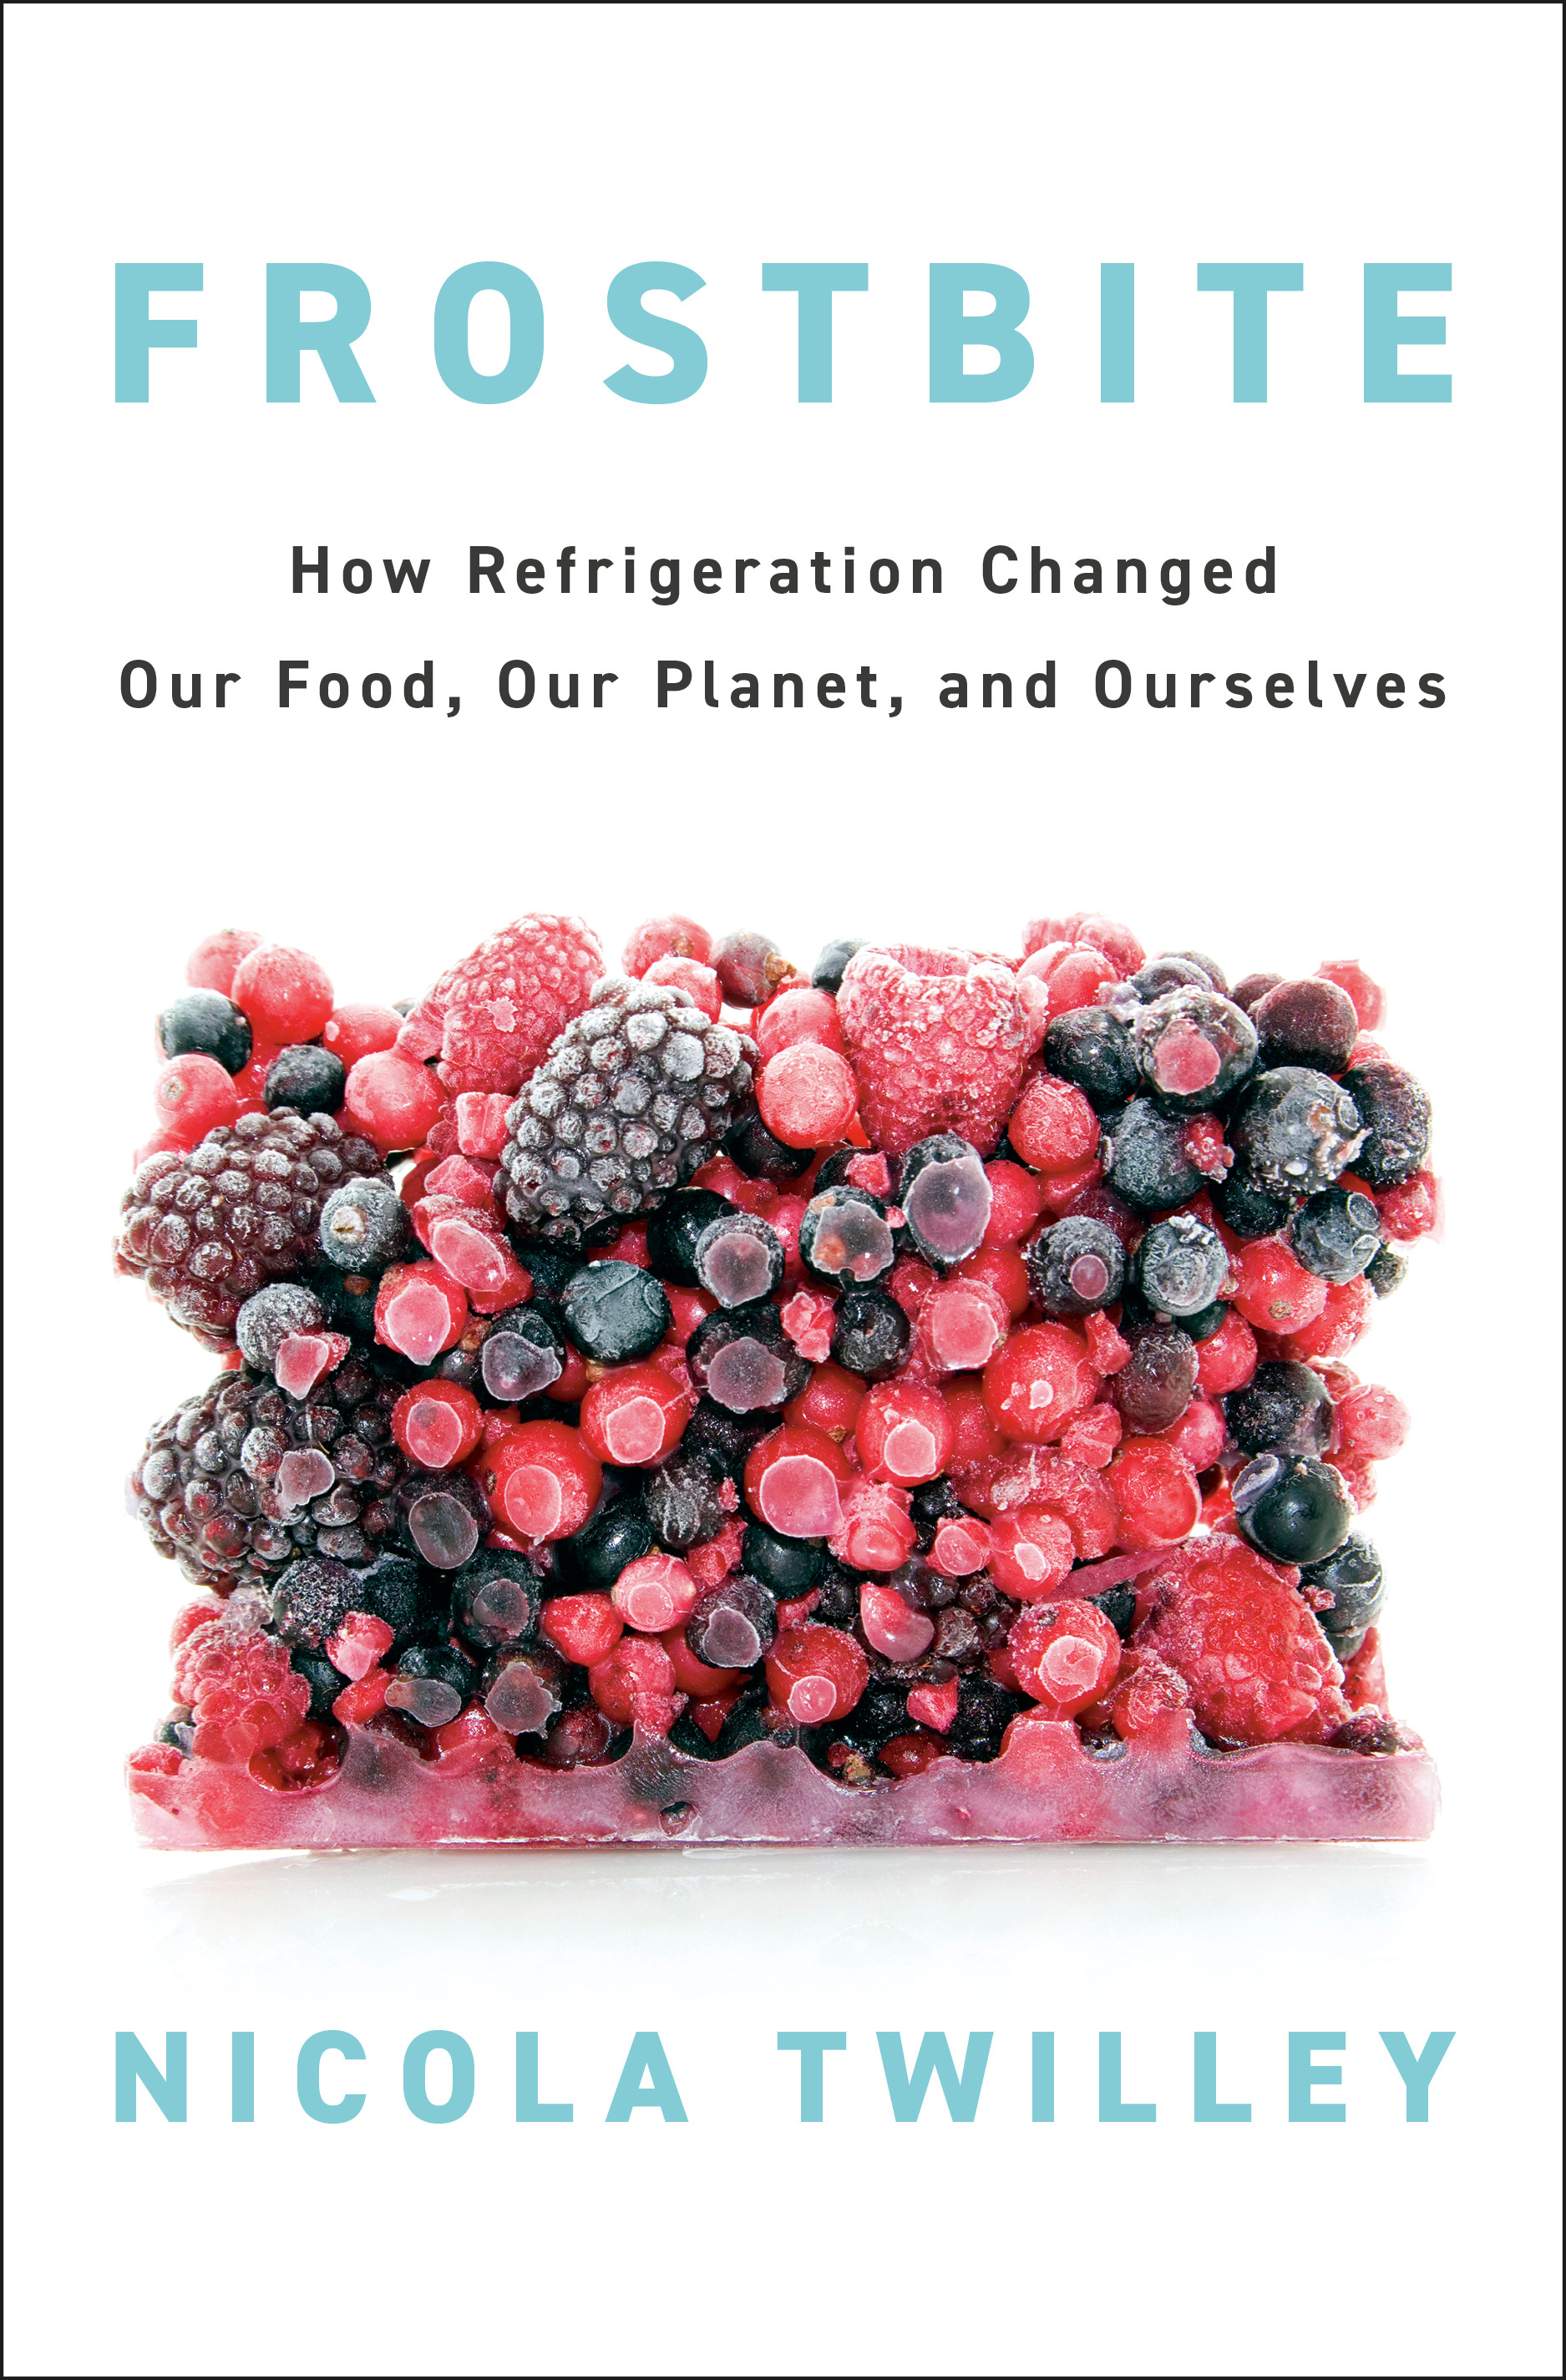 FROSTBITE: HOW REFRIGERATION CHANGED OUR FOOD, OUR PLANET, AND OURSELVES